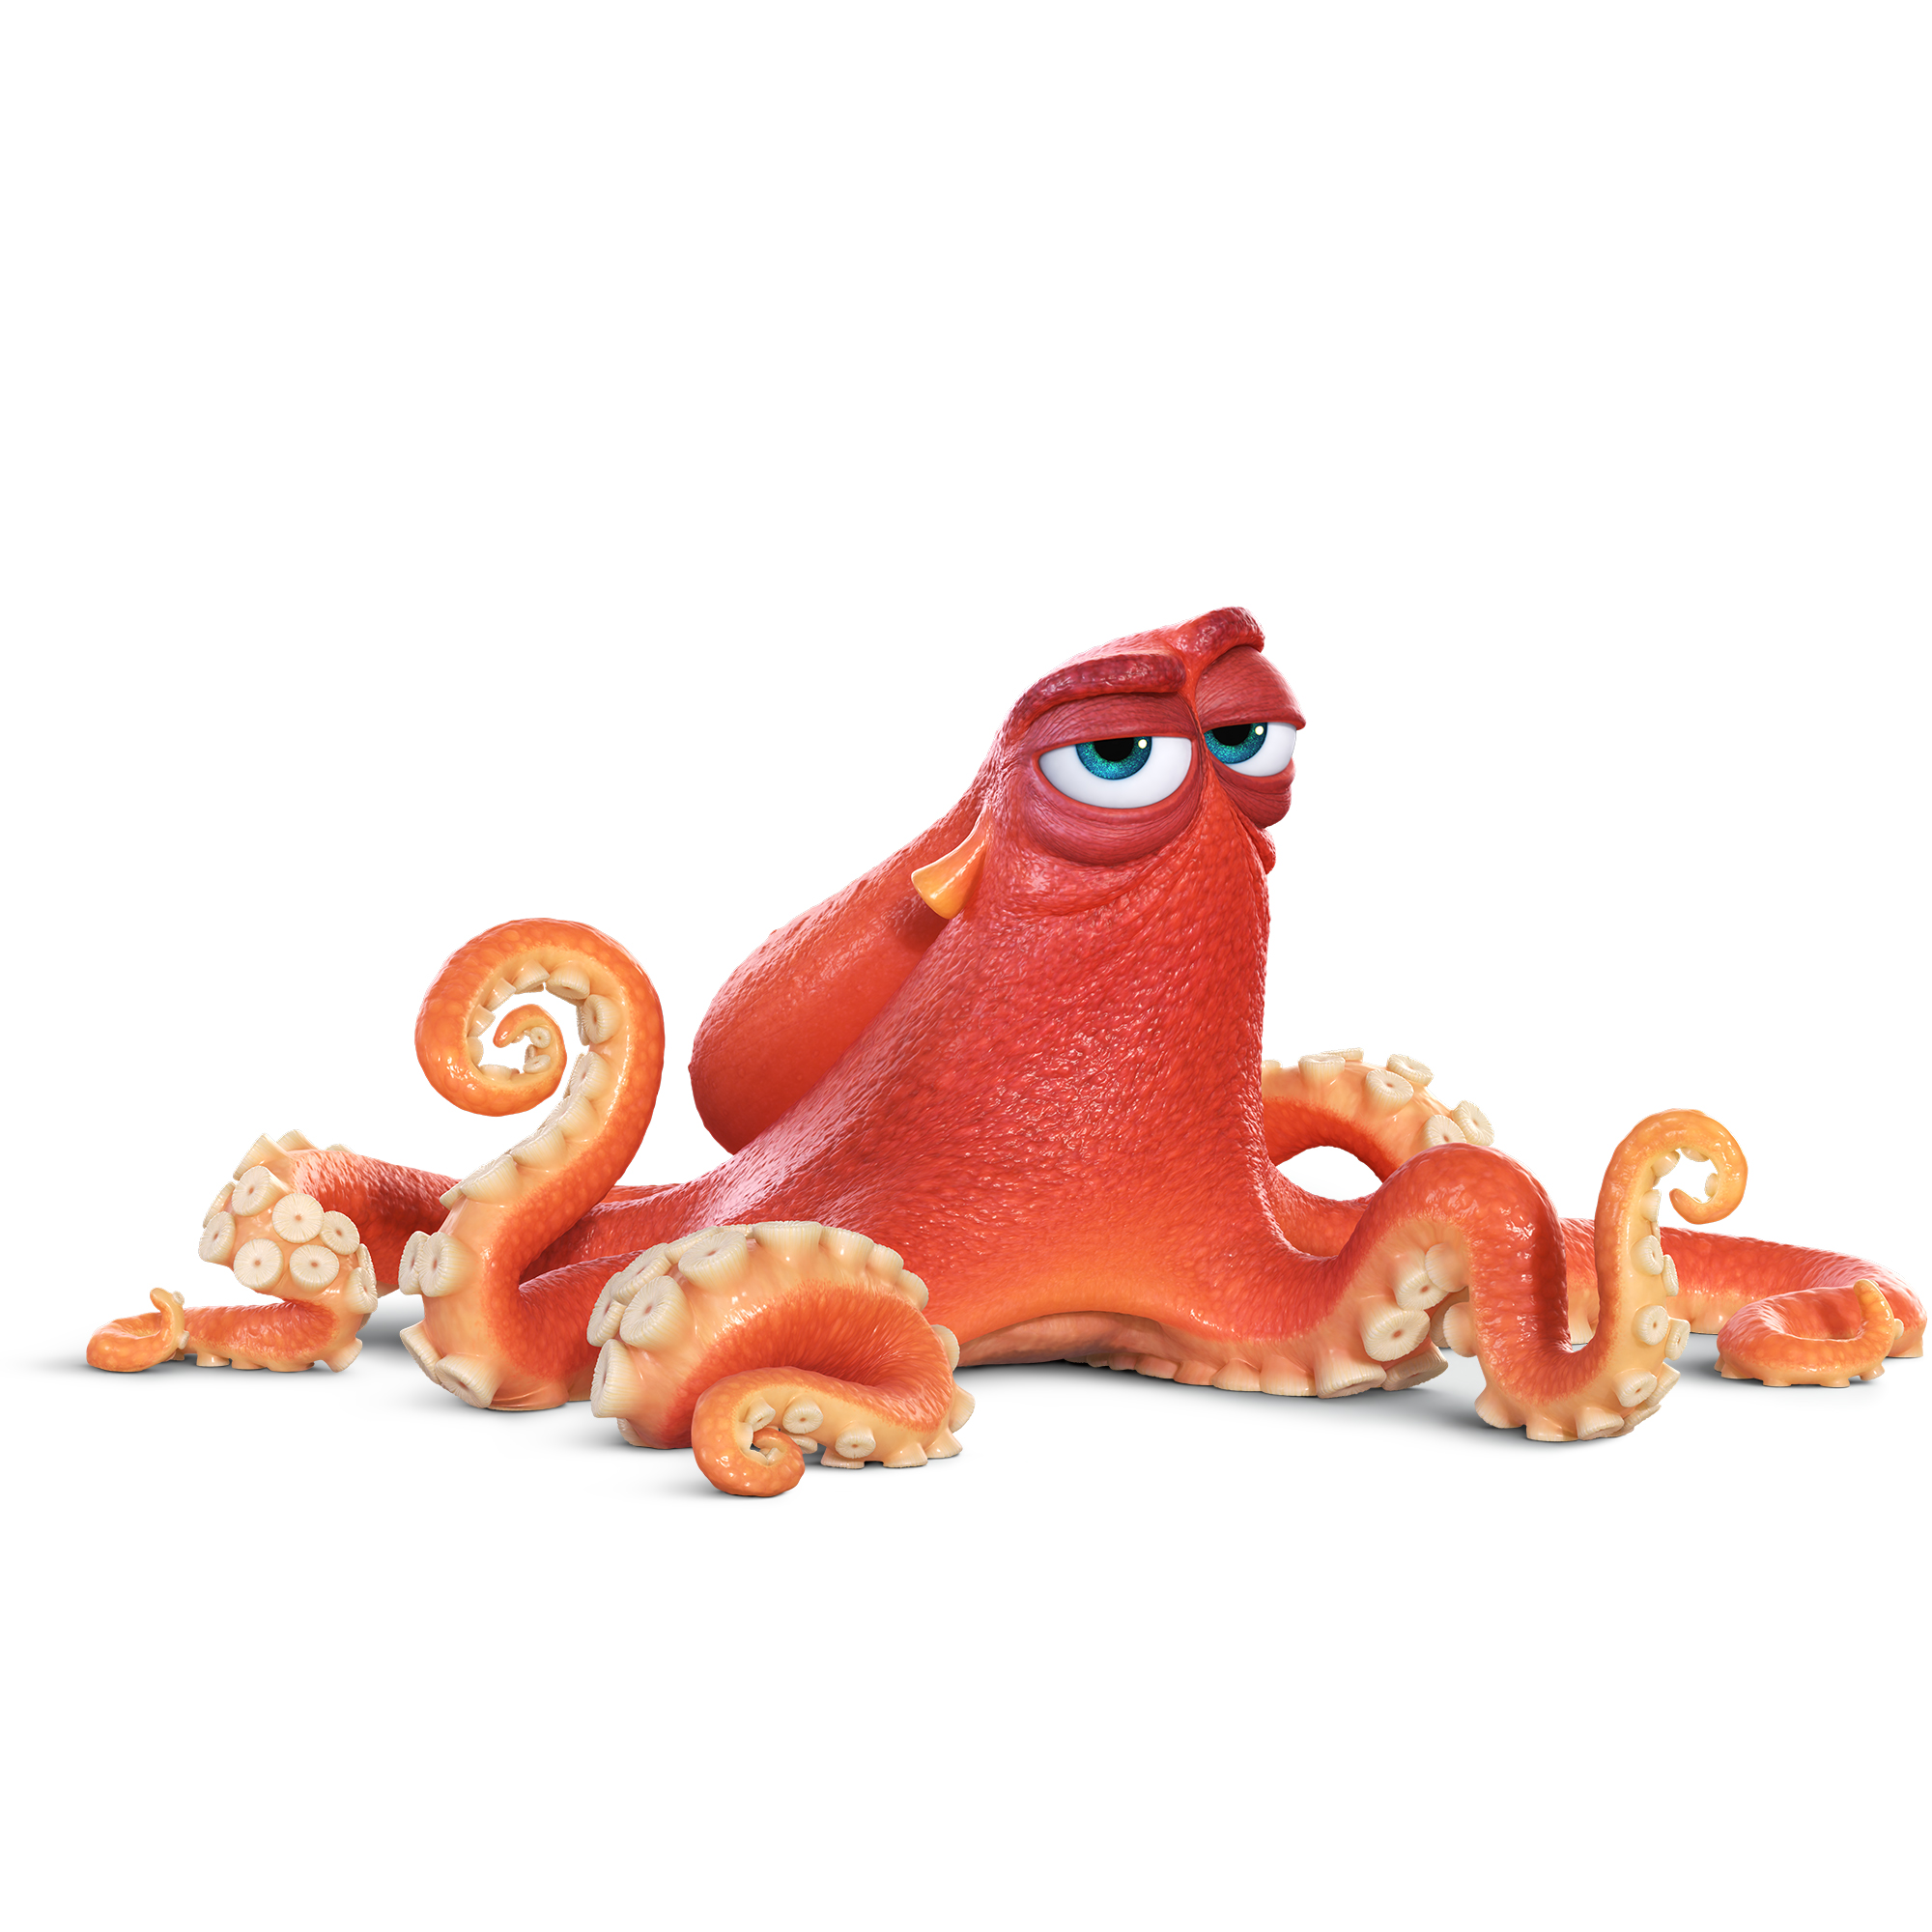 “Finding Dory’s” Octopus Hank’s Fun Facts